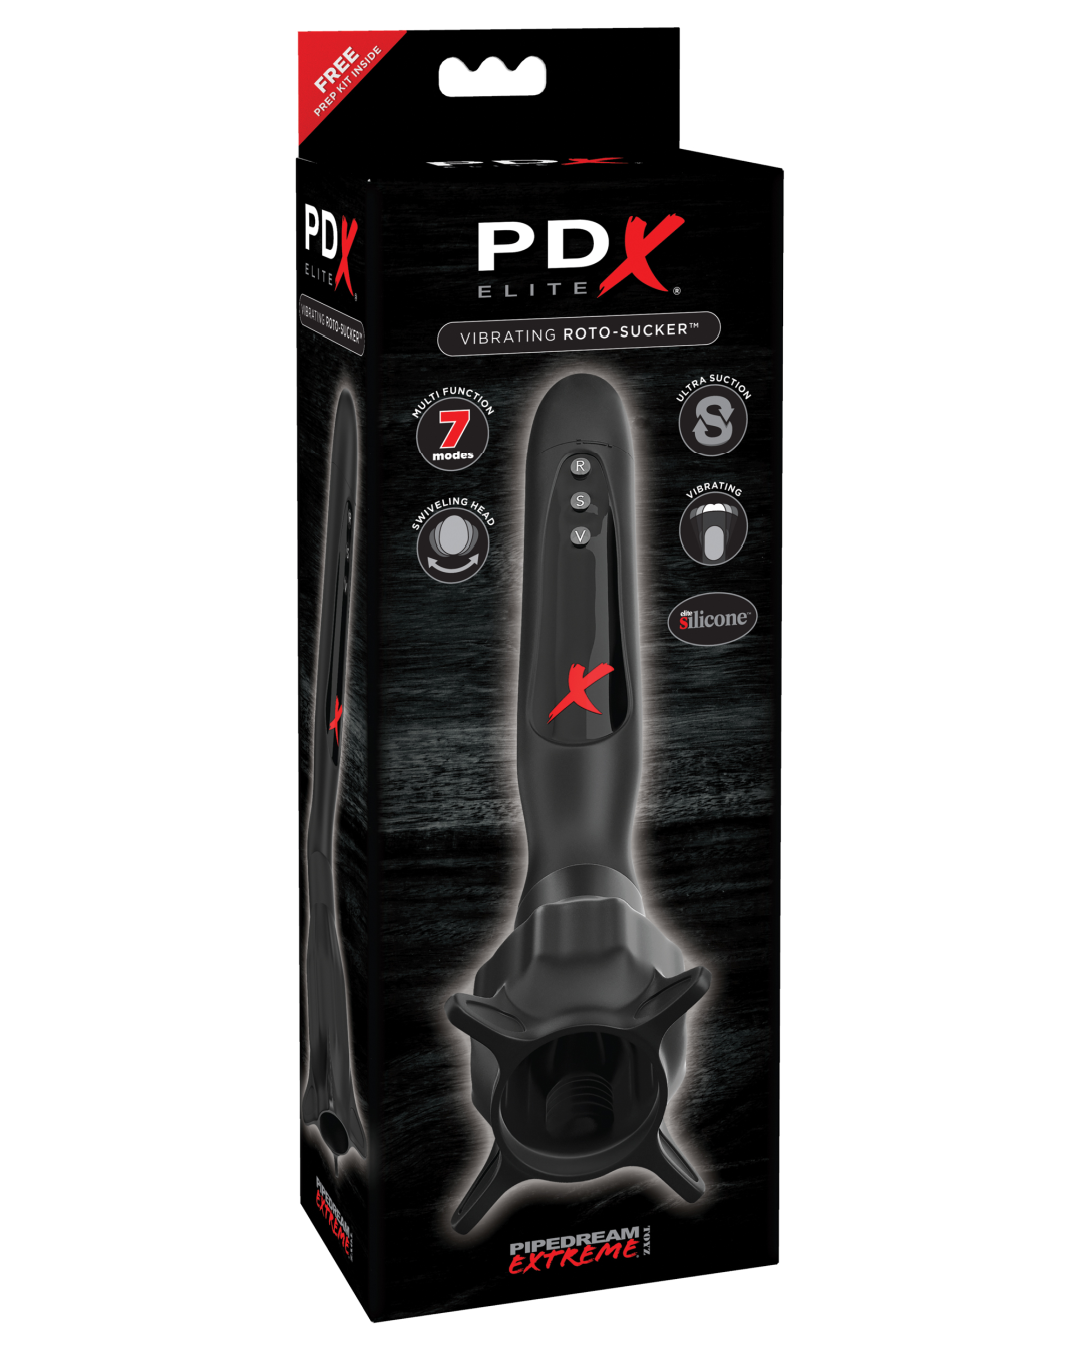 PDX Roto Sucker Suction and Vibration Penis Stroker  box